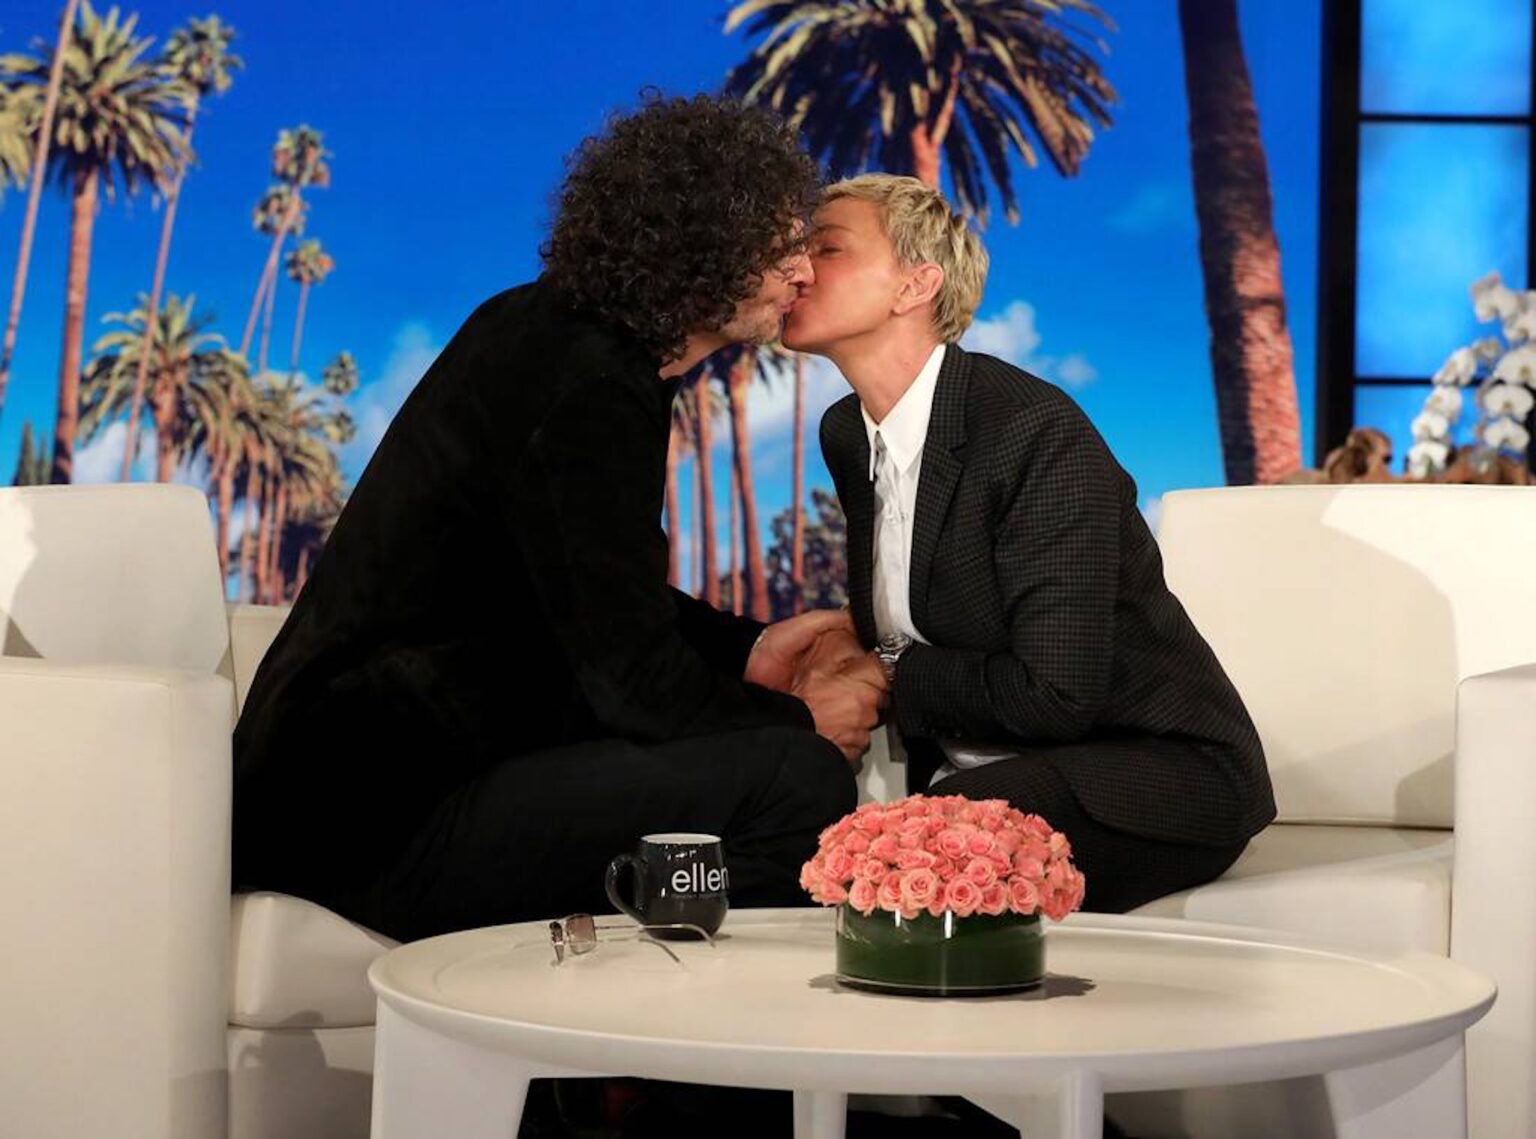 Ellen DeGeneres bullies the guests on her show. Here are all the best interviews on 'The Ellen DeGeneres Show' where Ellen got what was coming to her.